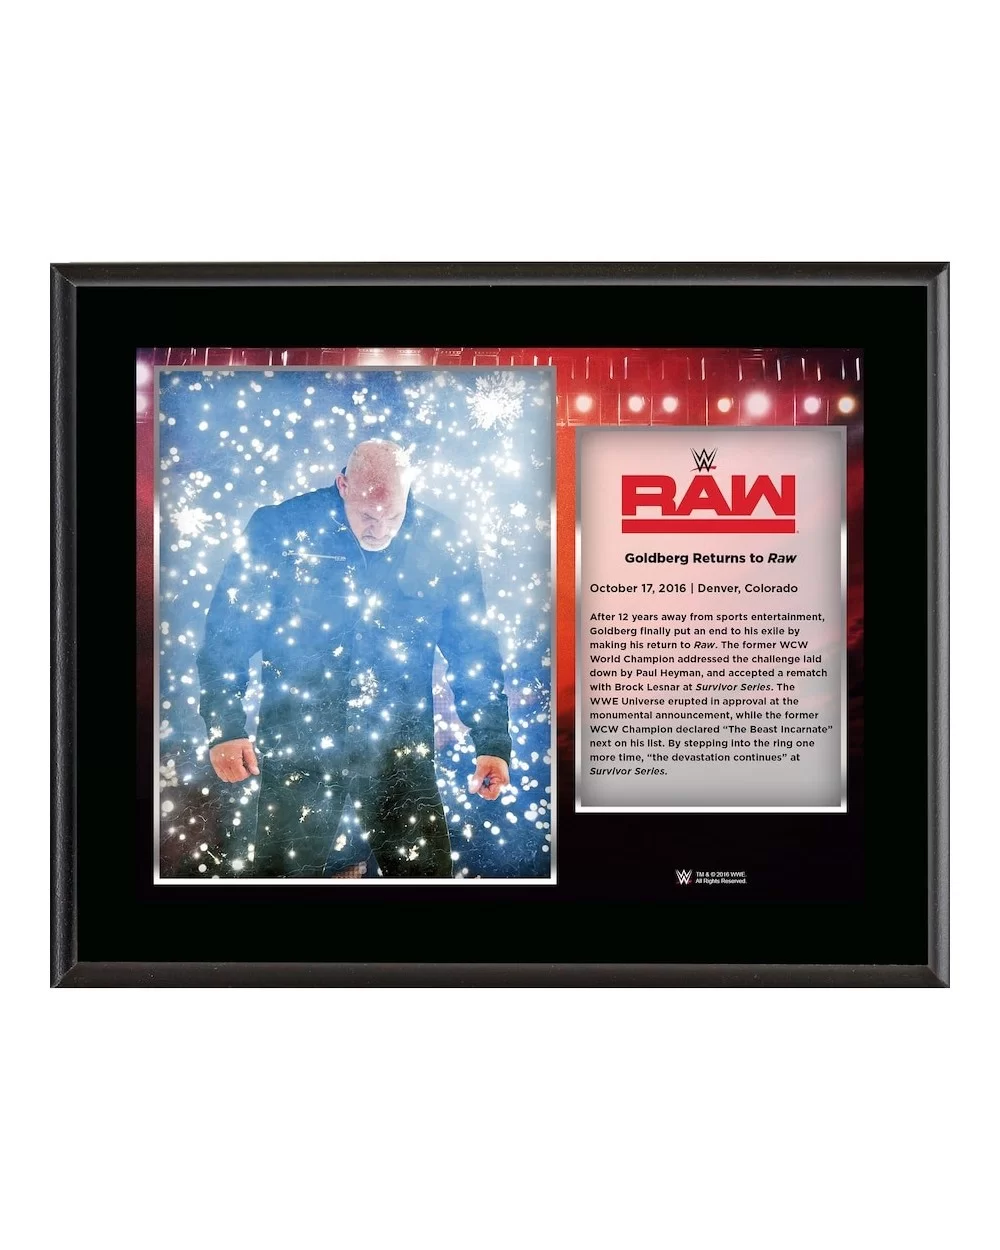 Goldberg Framed 10.5" x 13" October 17 2016 Monday Night RAW Sublimated Plaque $10.08 Collectibles